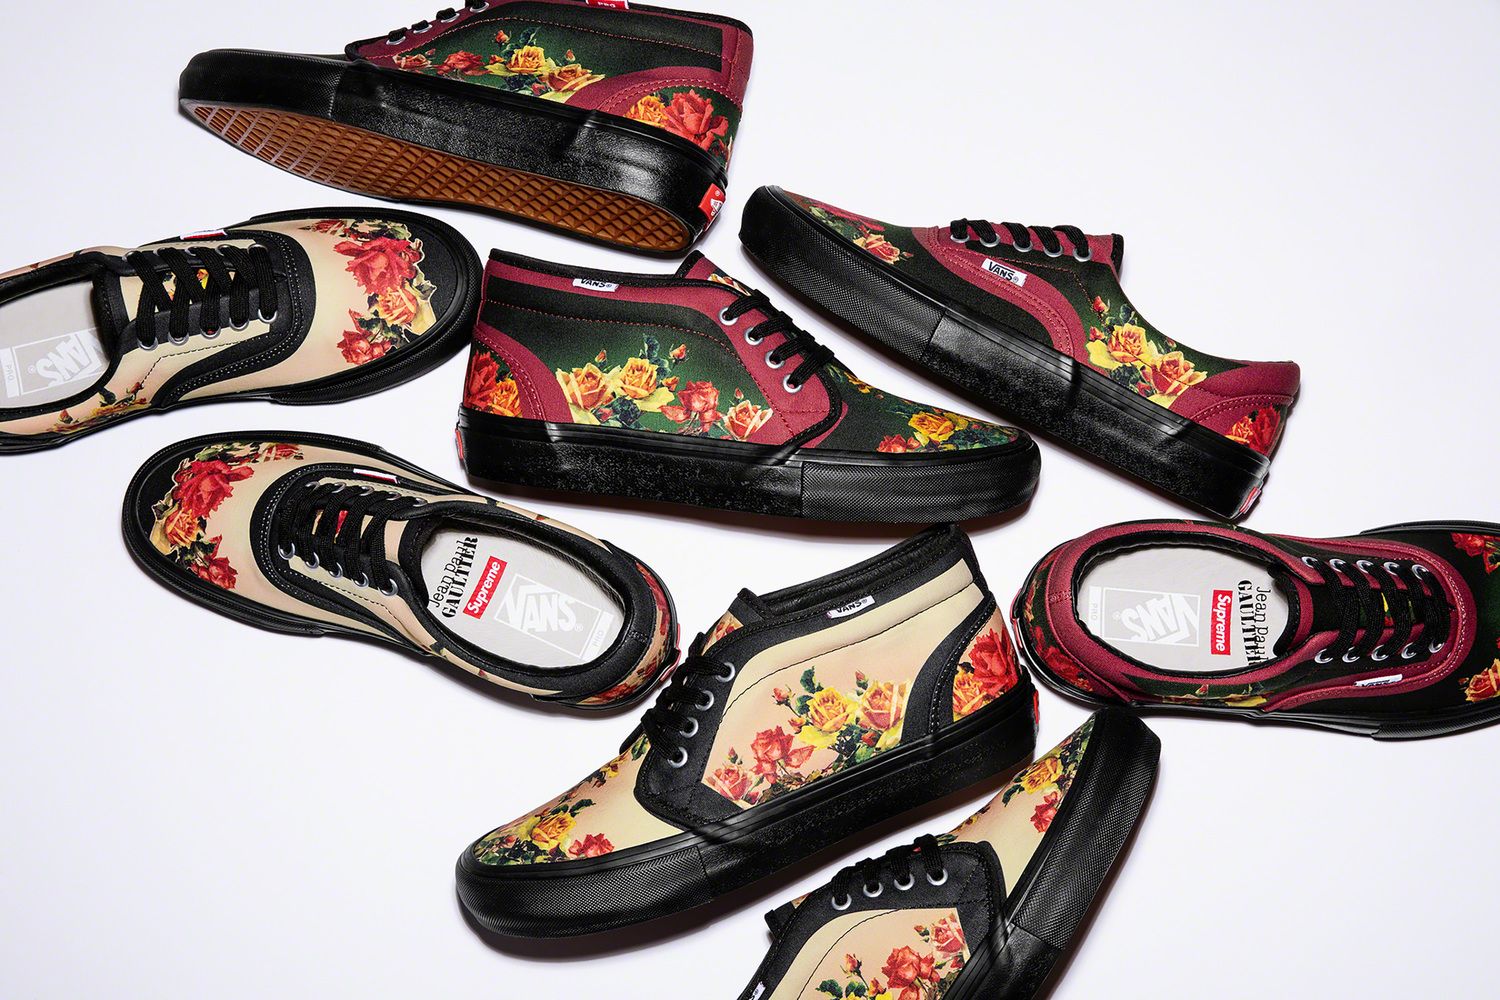 Jean Paul Gaultier Collaboration Vans and Chukka Sneakers